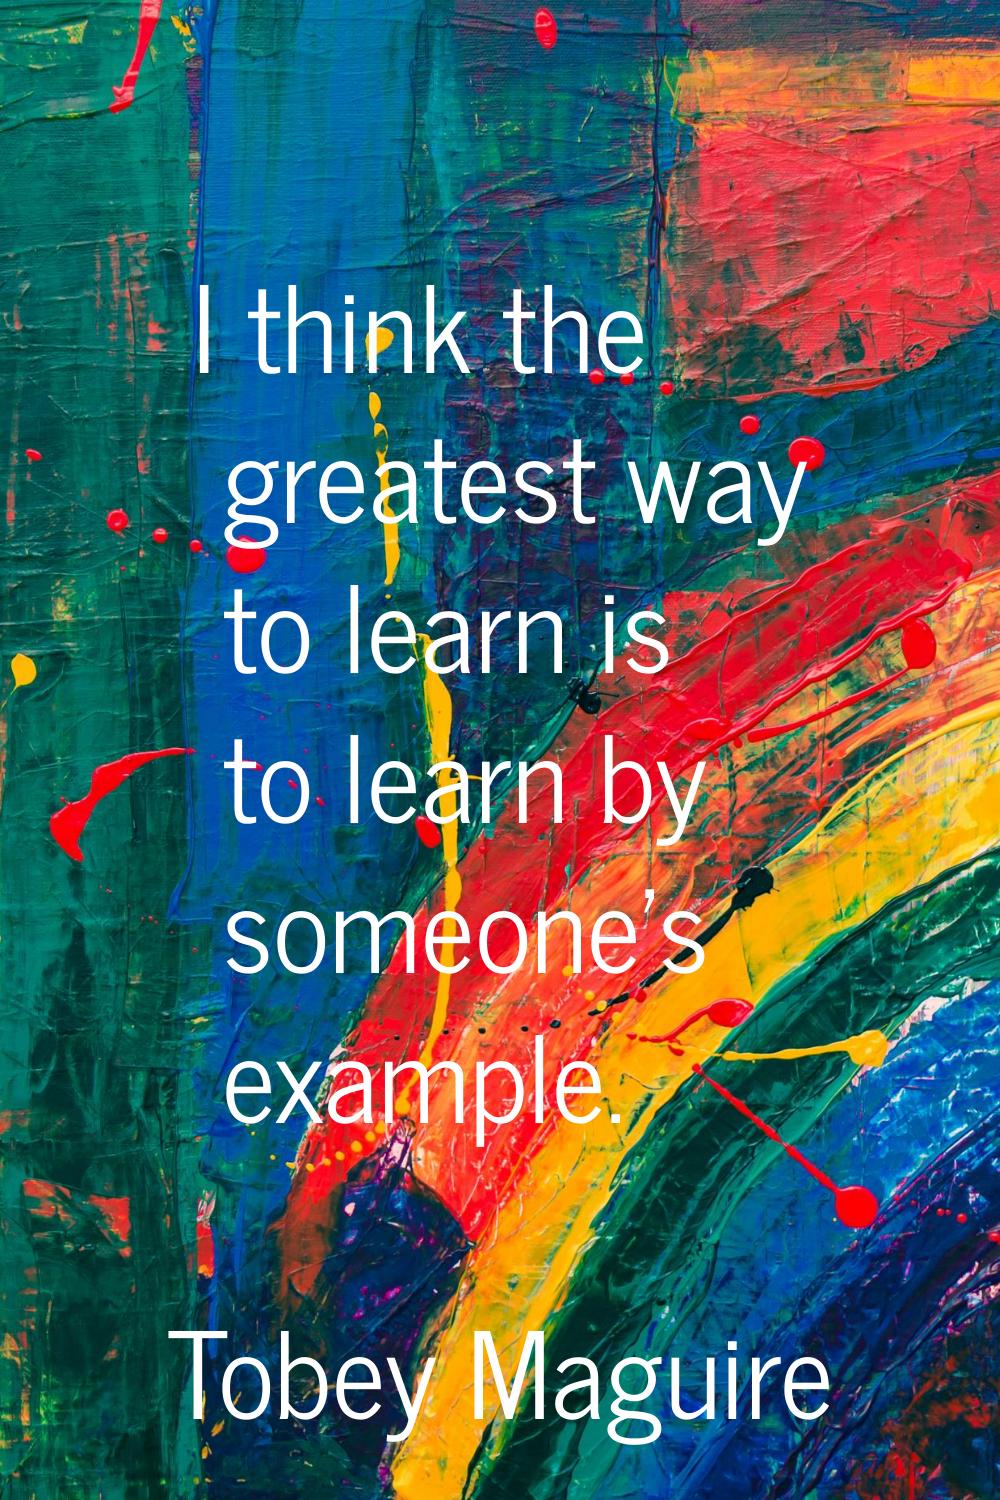 I think the greatest way to learn is to learn by someone's example.